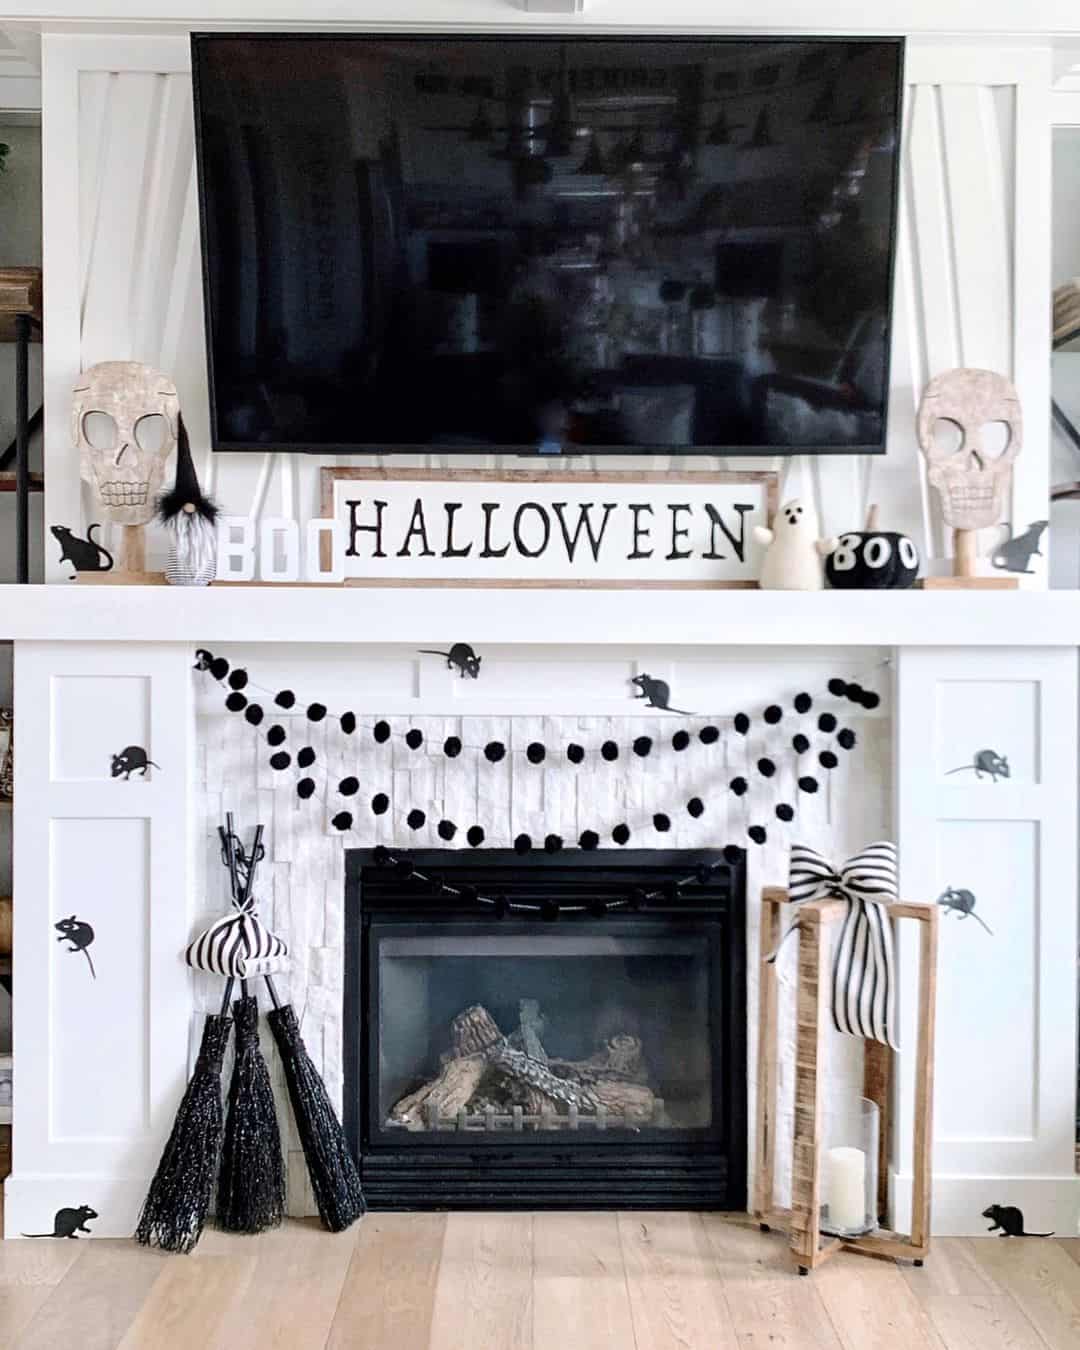 A Striking Black and White Halloween Fireplace Display